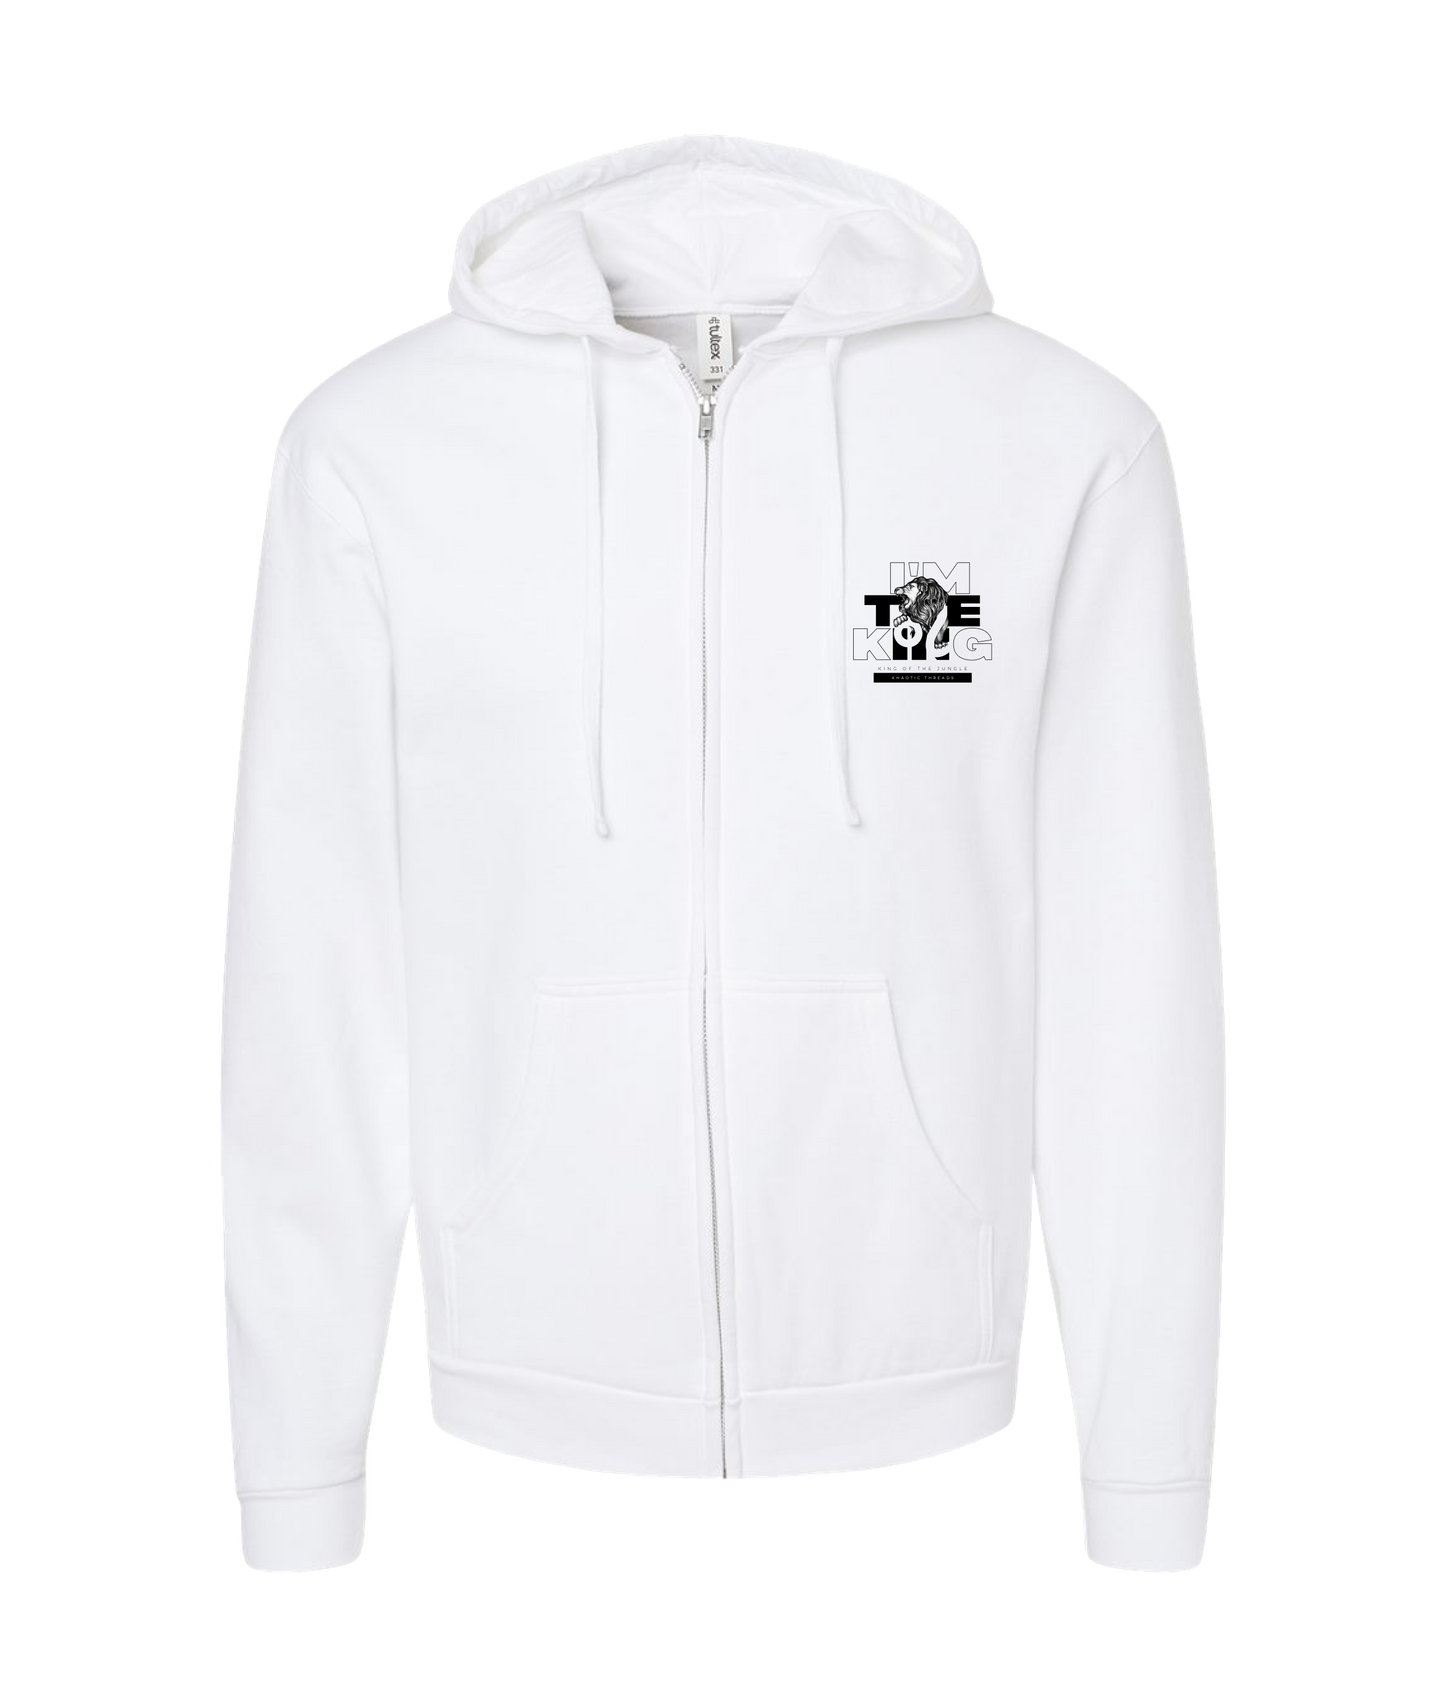 khaotic Threads - I'm The King - White Zip Up Hoodie